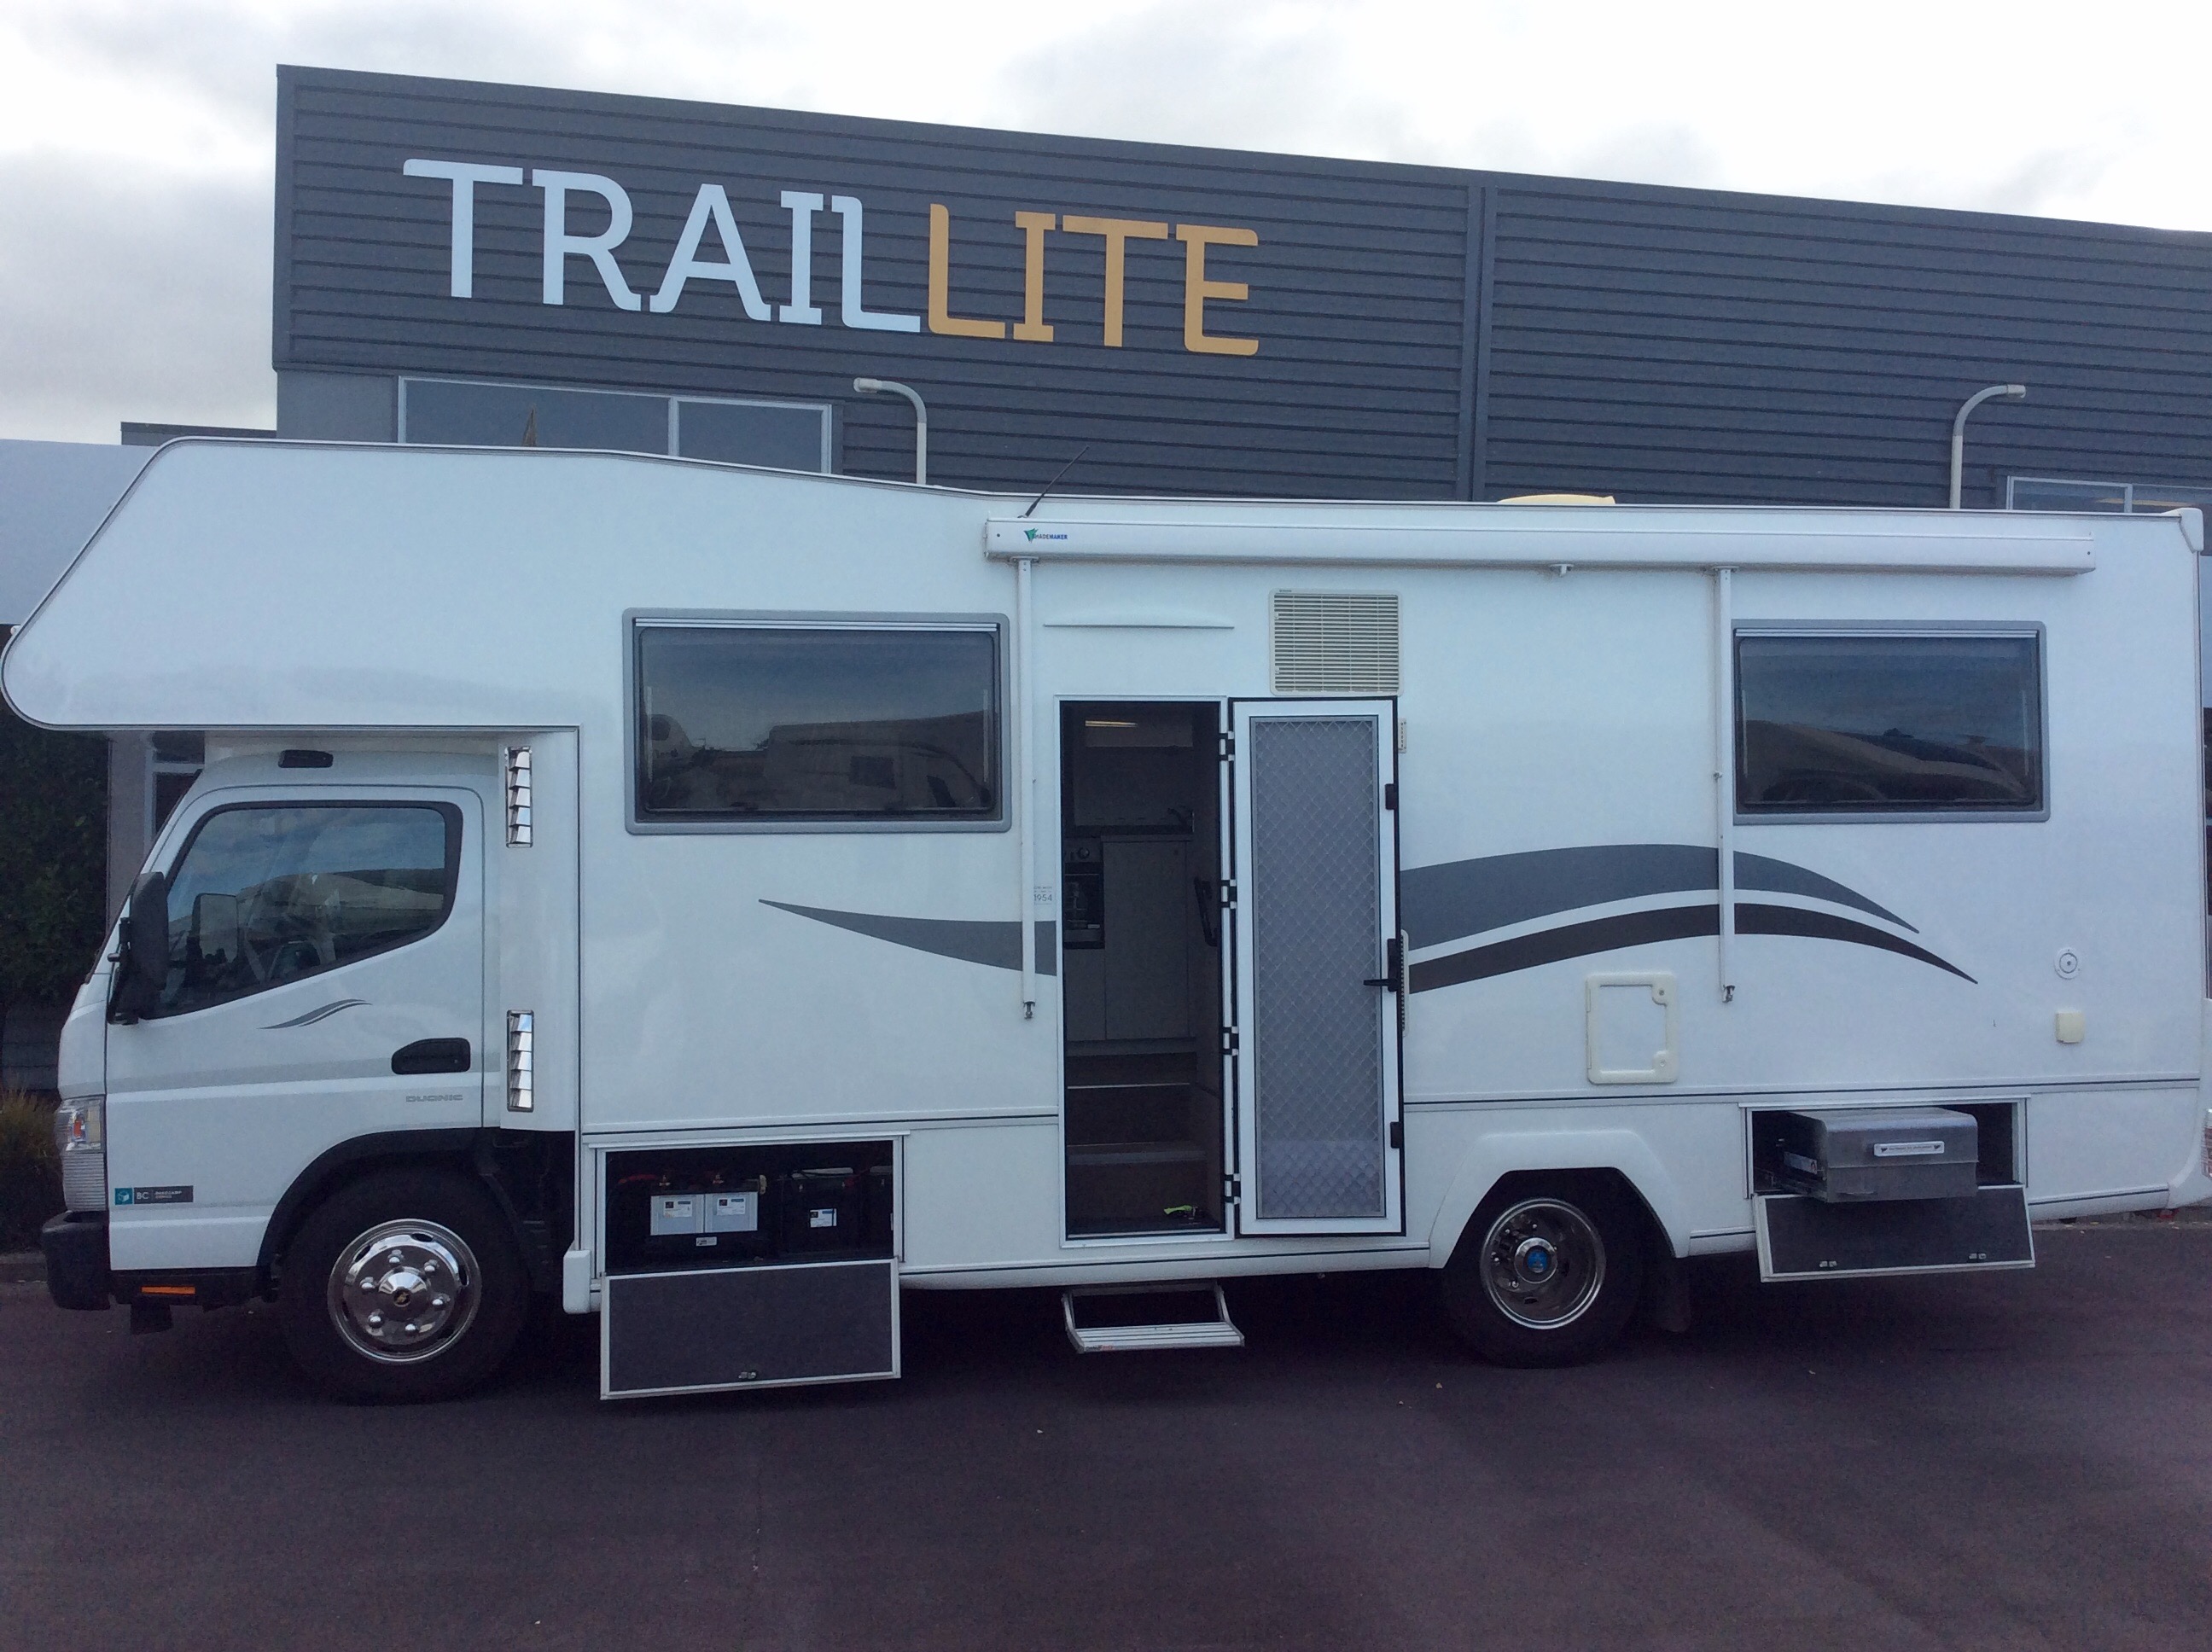 Selling your motorhome or caravan what you can expect to get for it